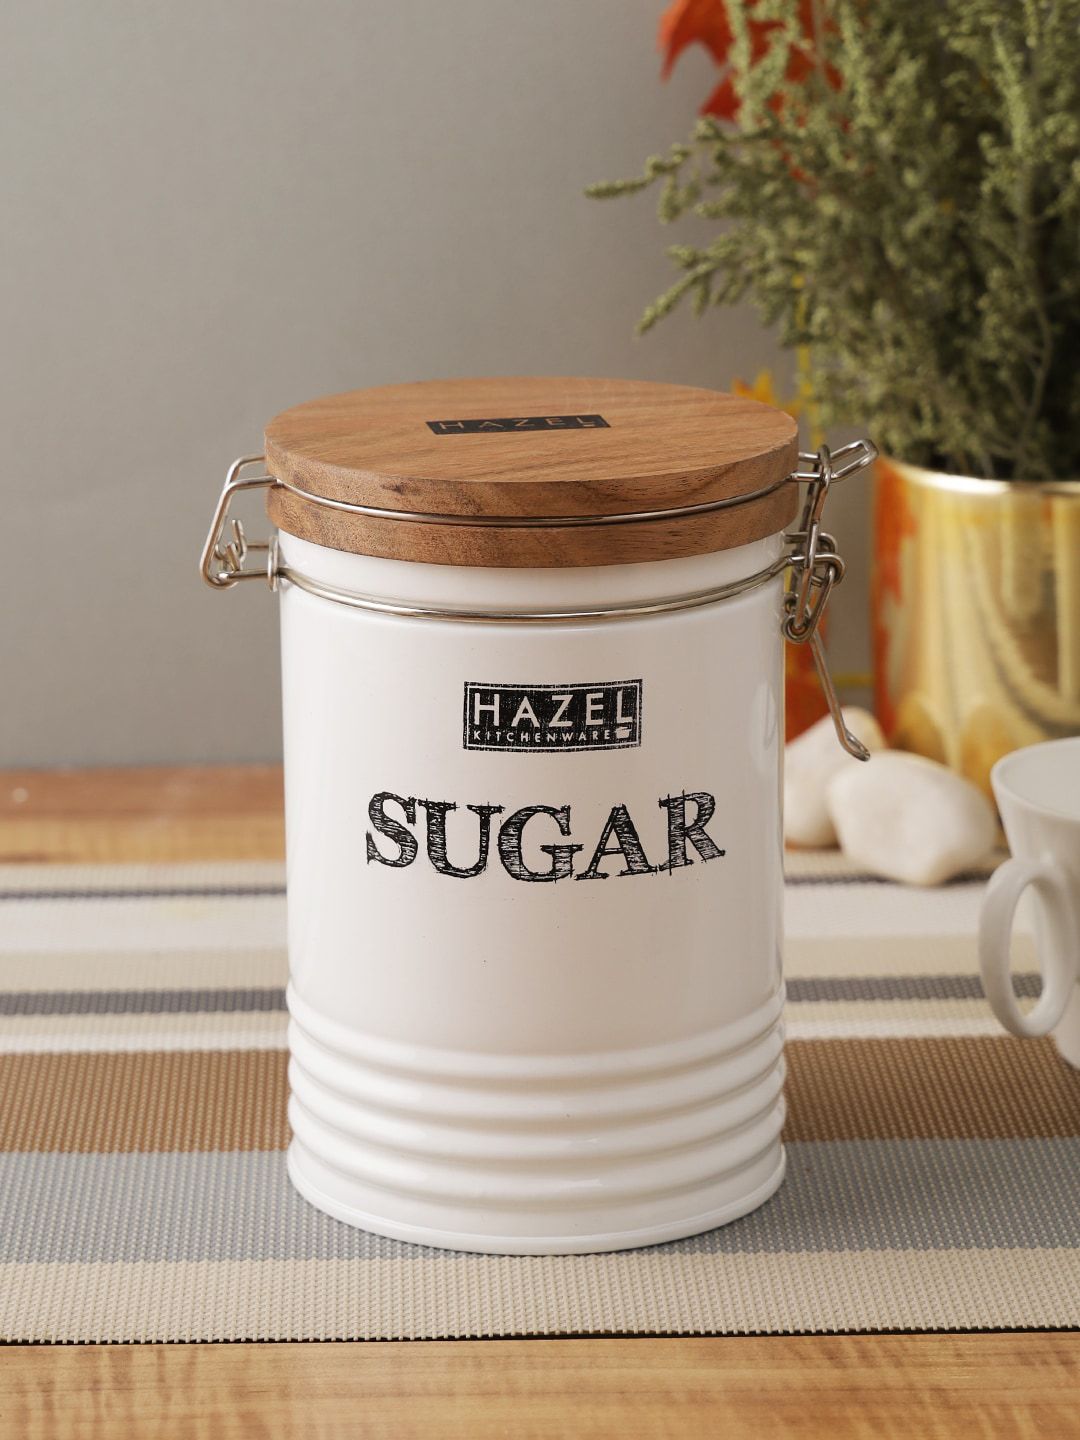 HAZEL White & Brown Printed Sugar Container with Wooden Lid Price in India